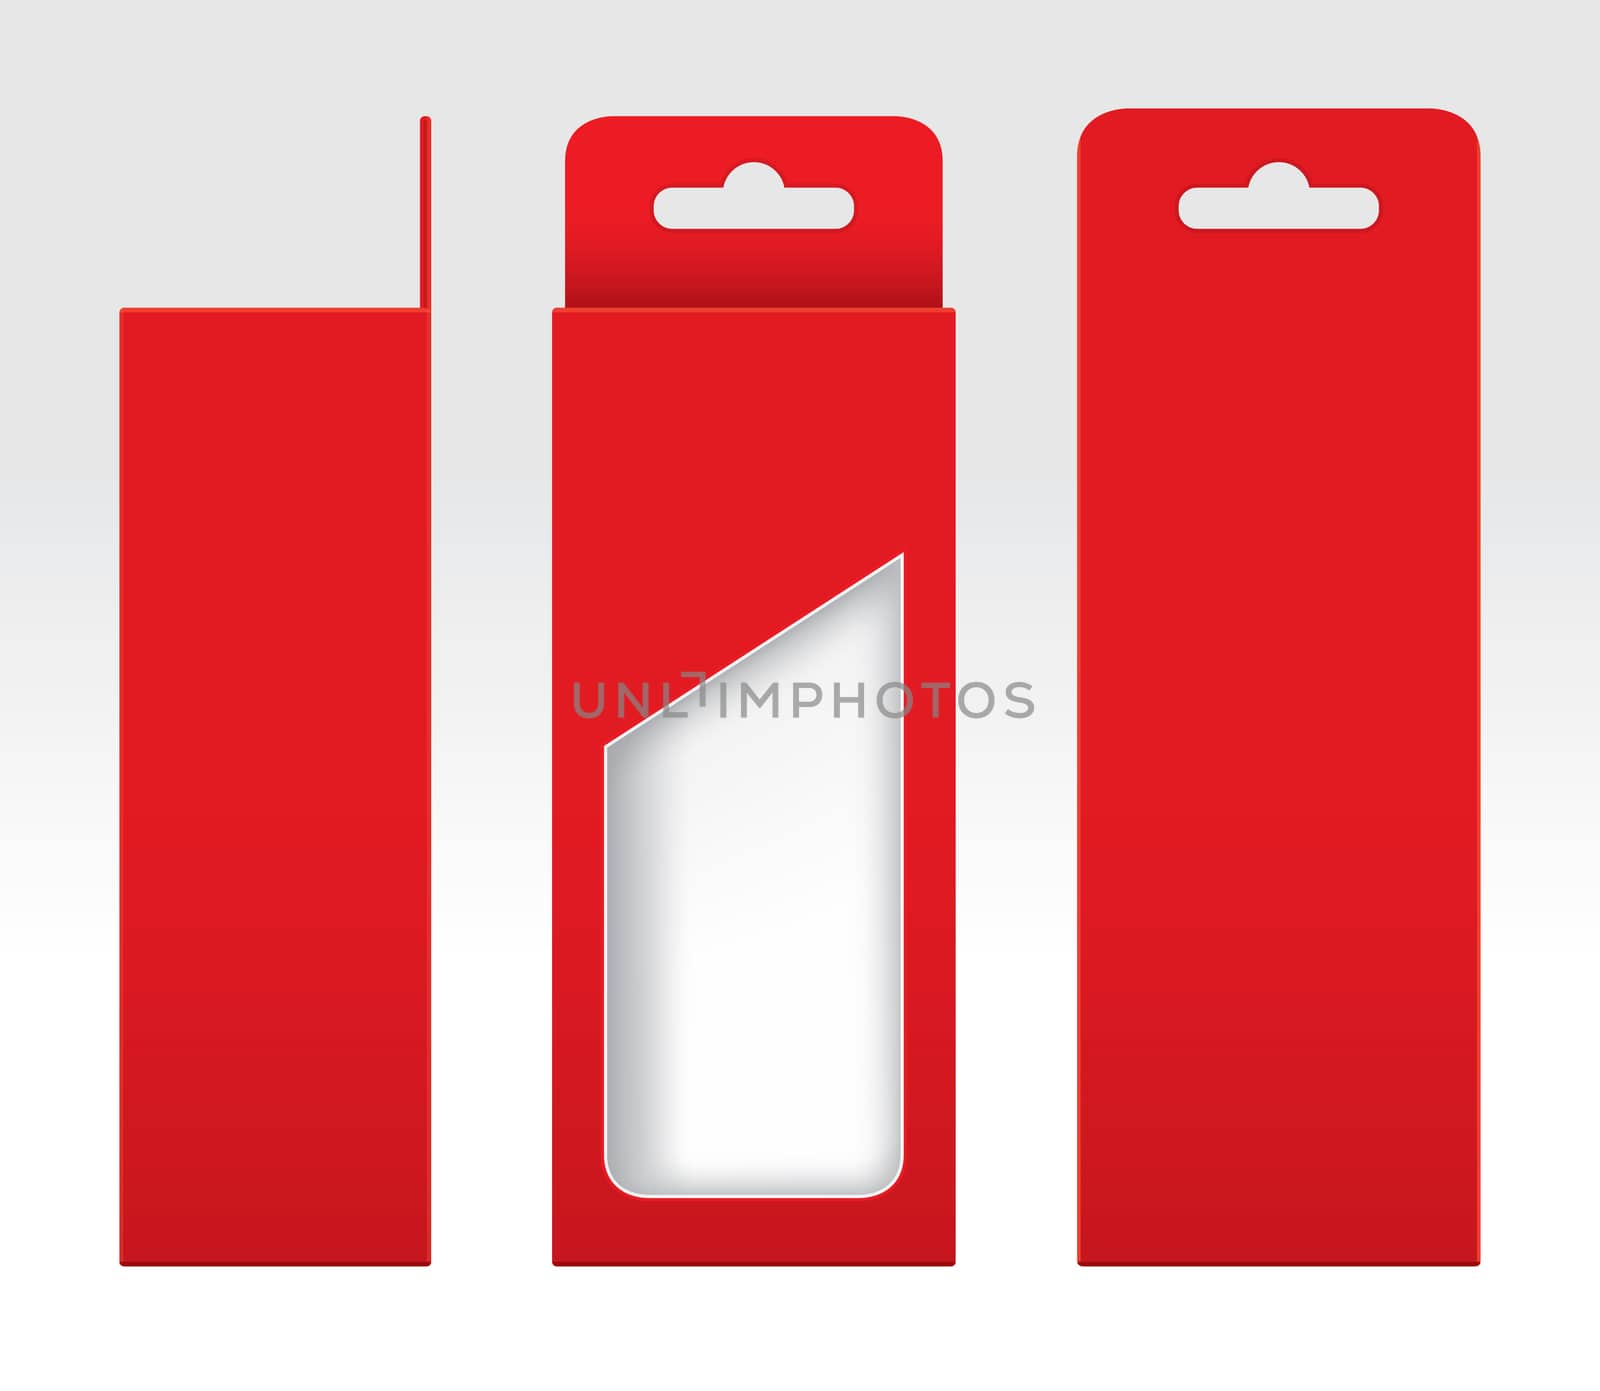 Hanging Red Box window cut out Packaging Template blank, Empty Box red Cardboard, Gift Boxes red kraft Package Carton, Premium red box empty